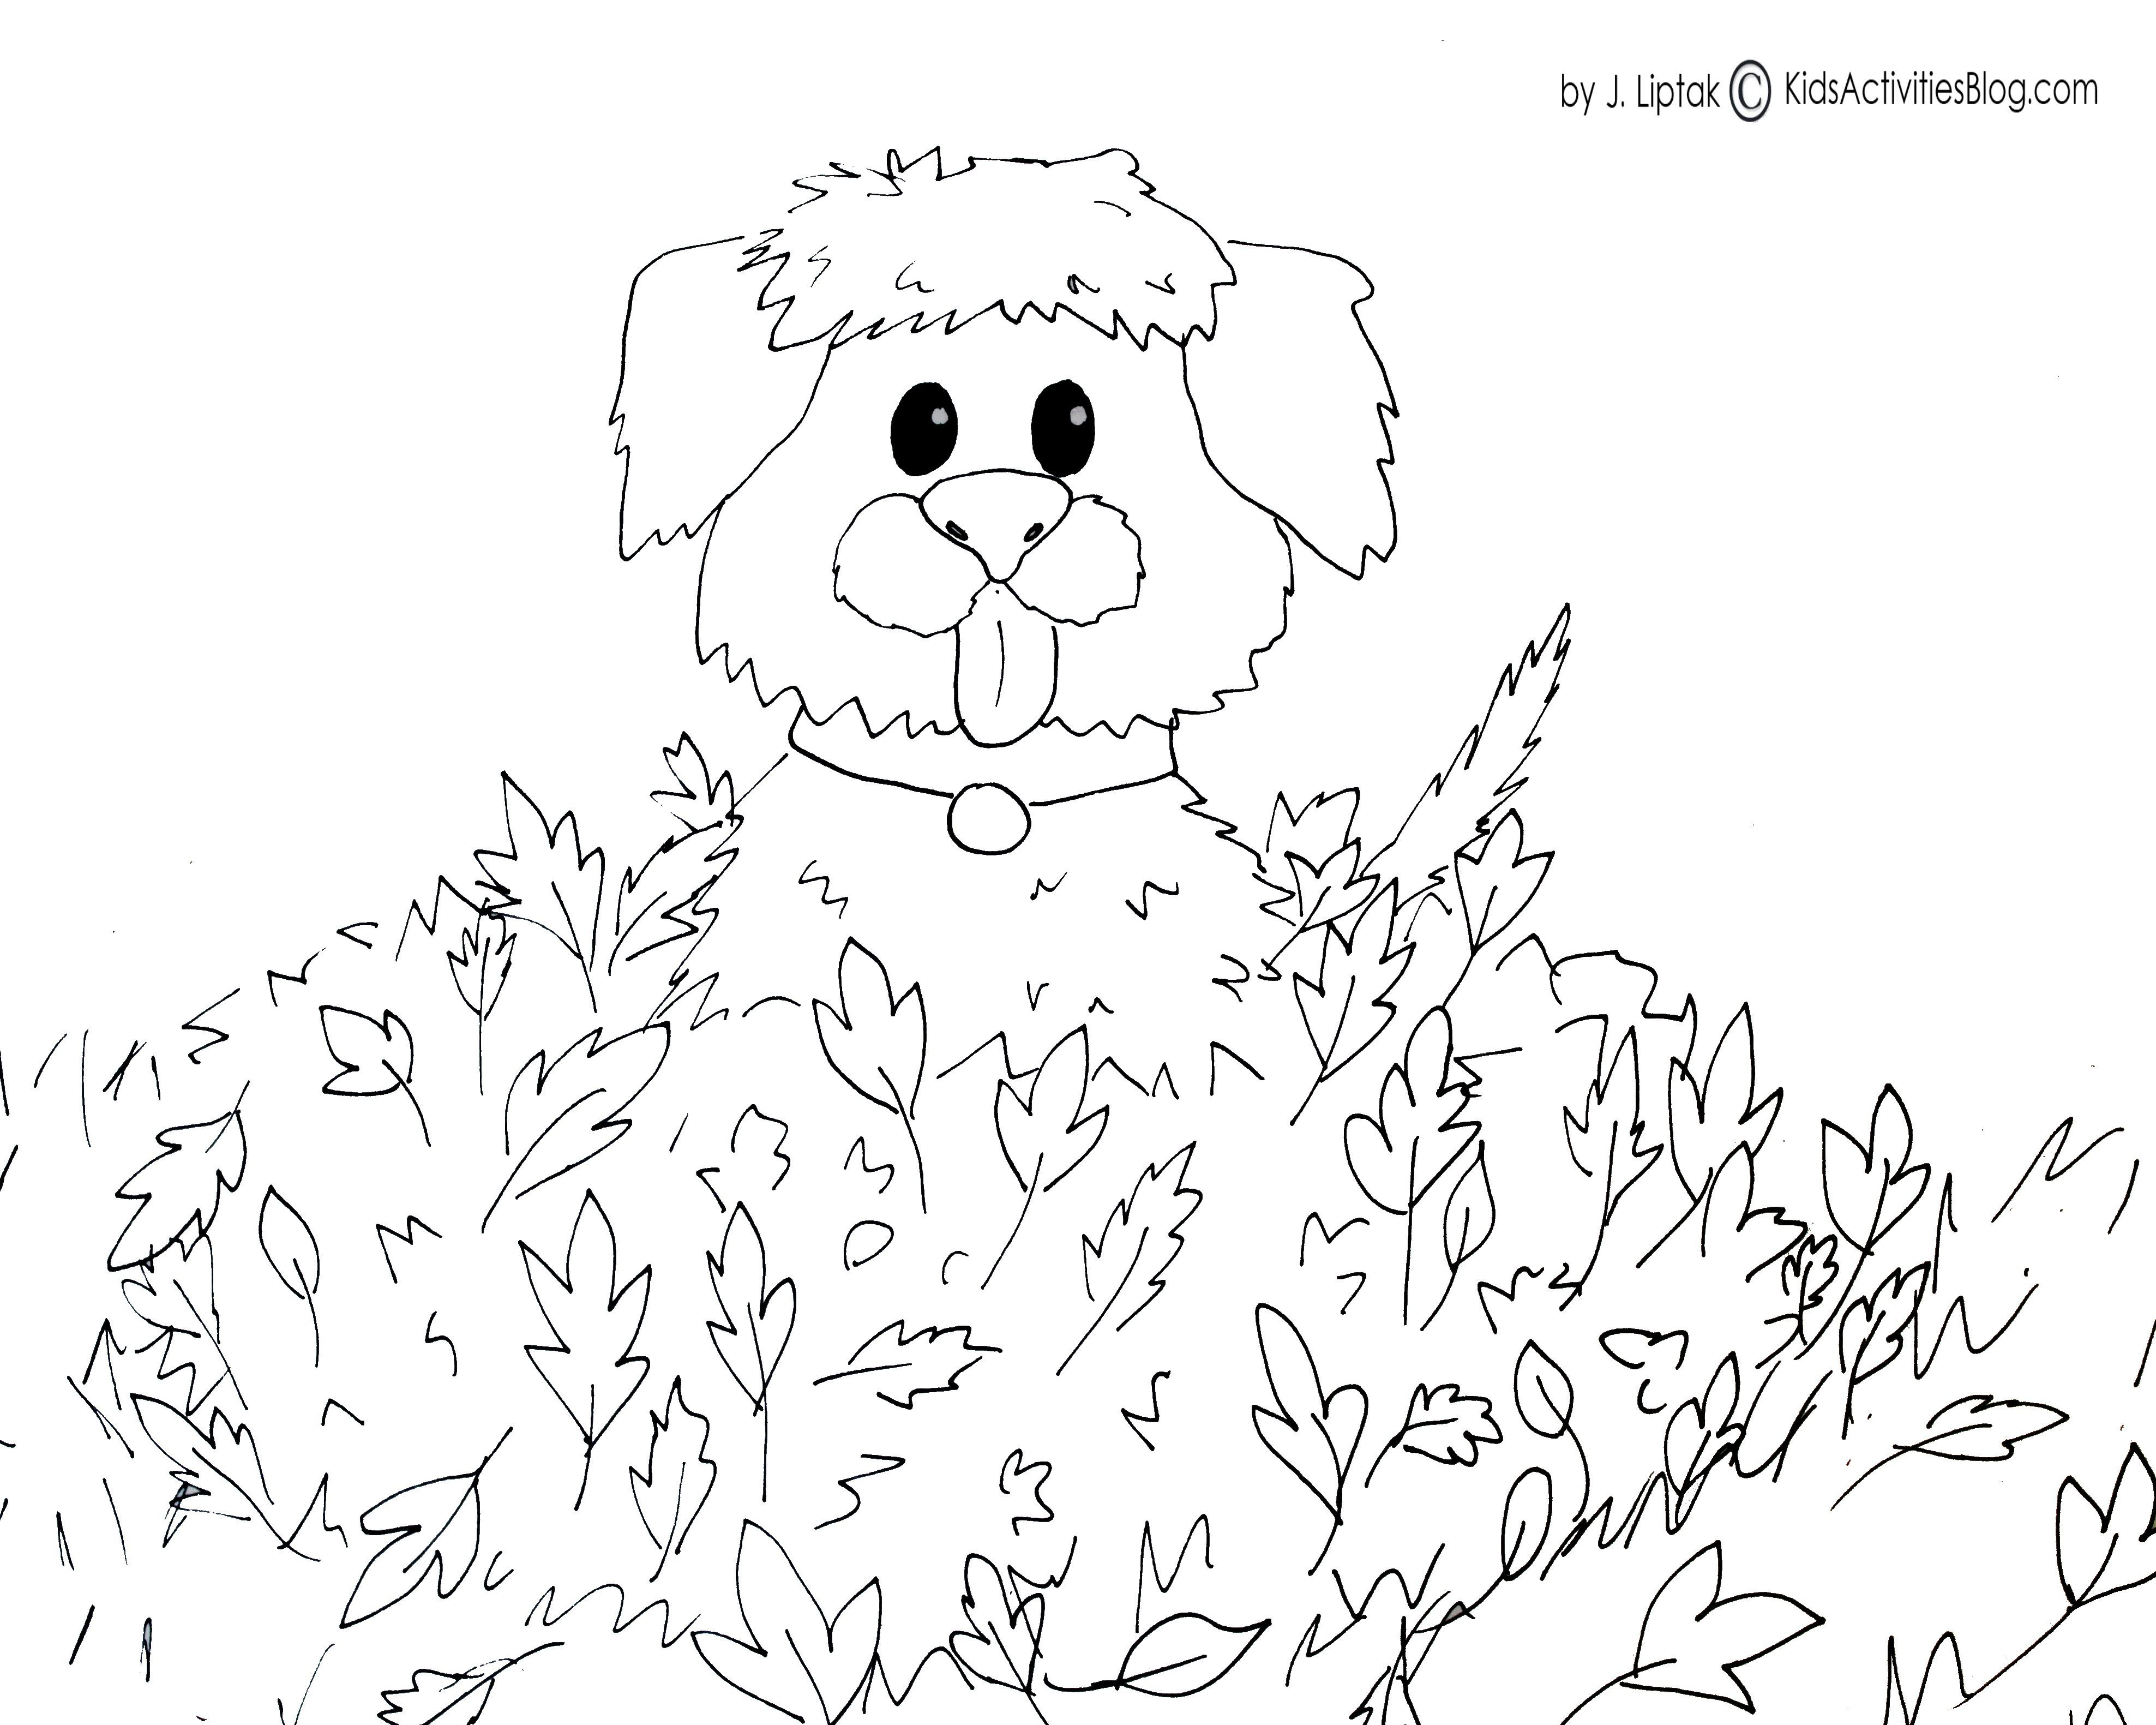 Printable Coloring Pages Fall
 4 FREE PRINTABLE FALL COLORING PAGES Kids Activities